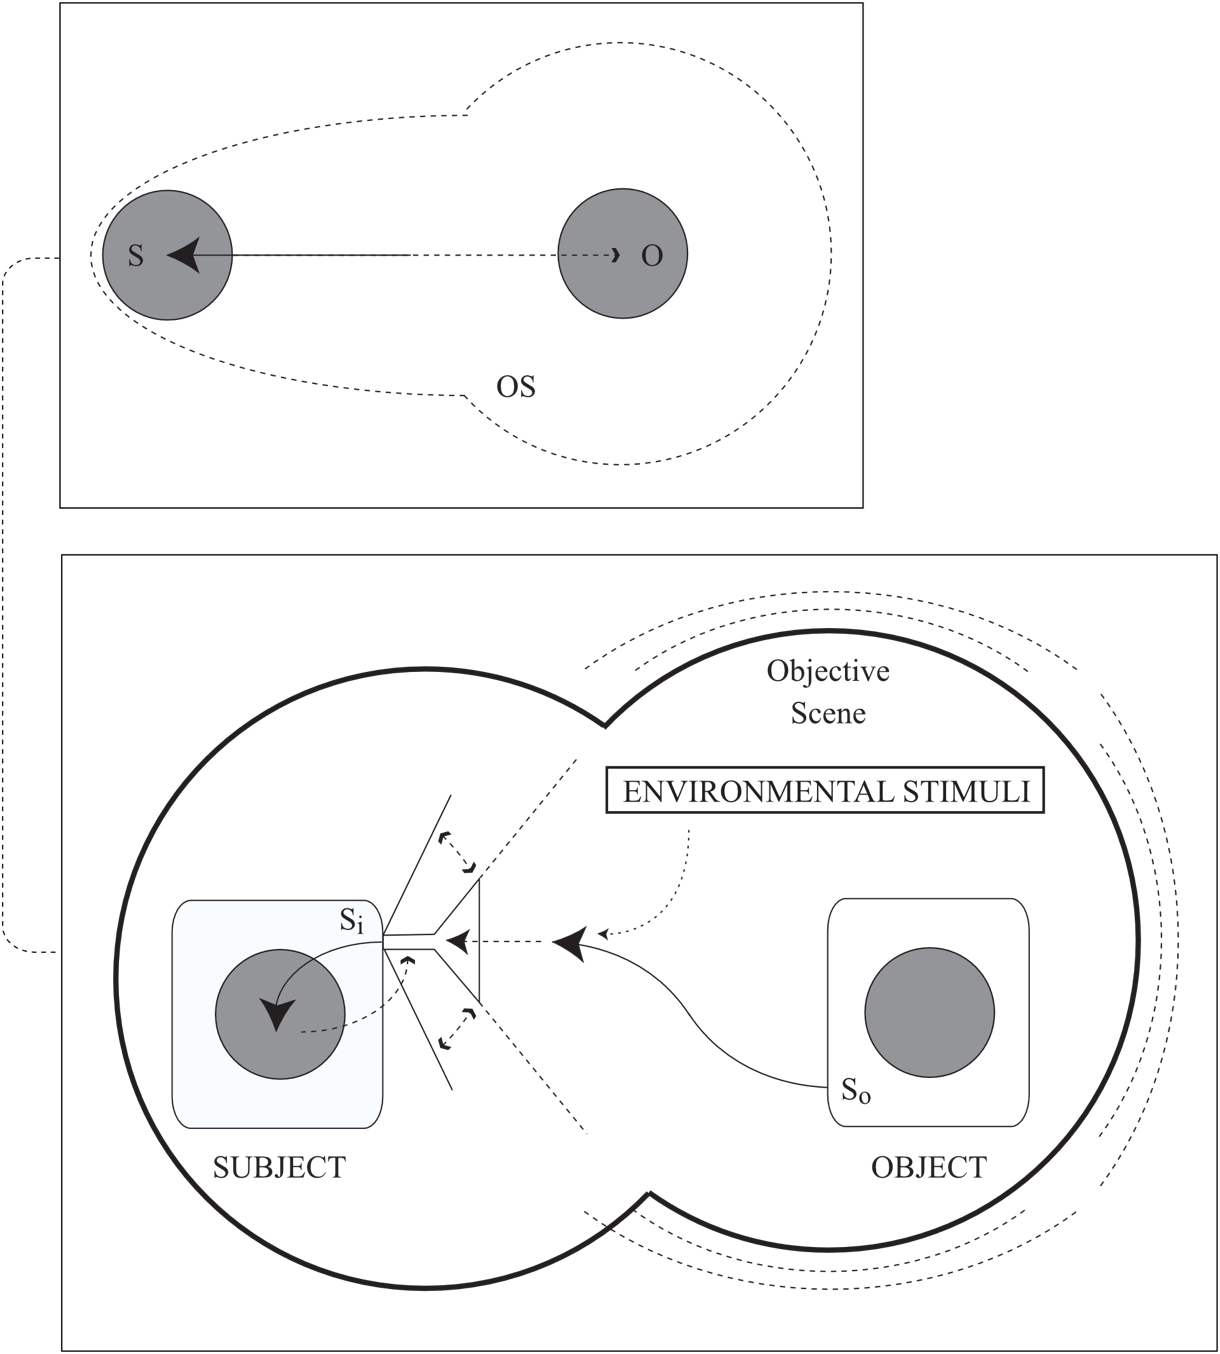 This is like the previous diagram, except that the objective scene perimeter surrounding the object has extended a lobe to encompass the subject.